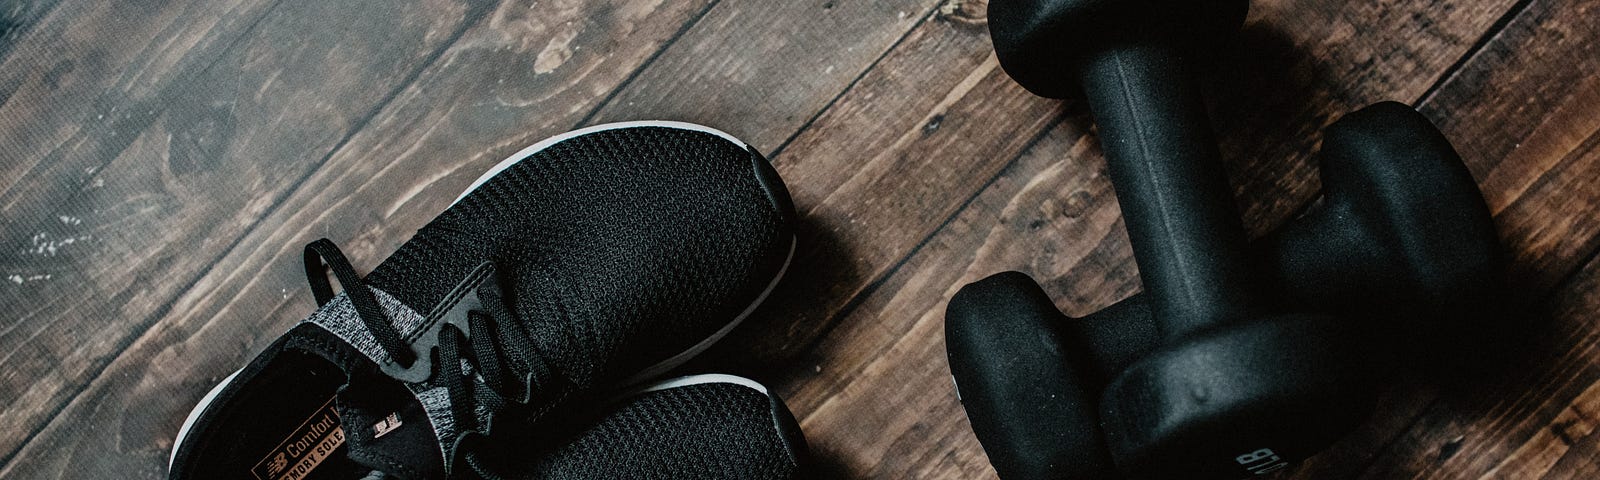 Black sneakers and hand weights on a wooden floor